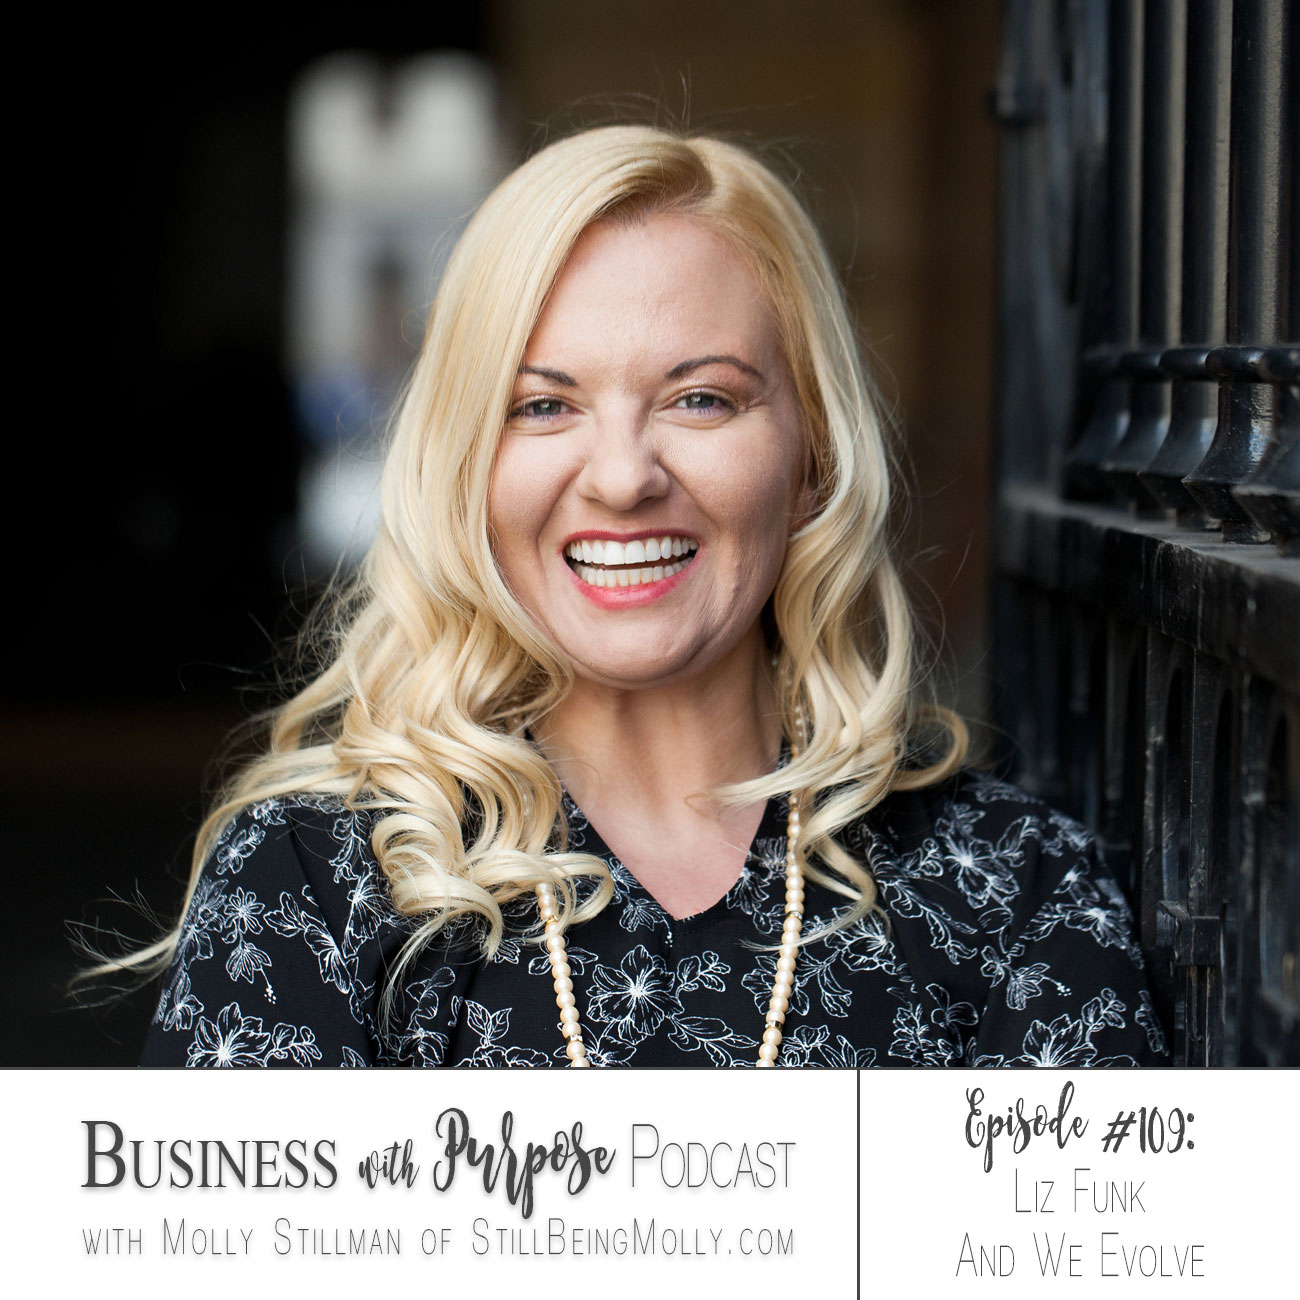 Business with Purpose Podcast EP 109: Liz Funk, And We Evolve